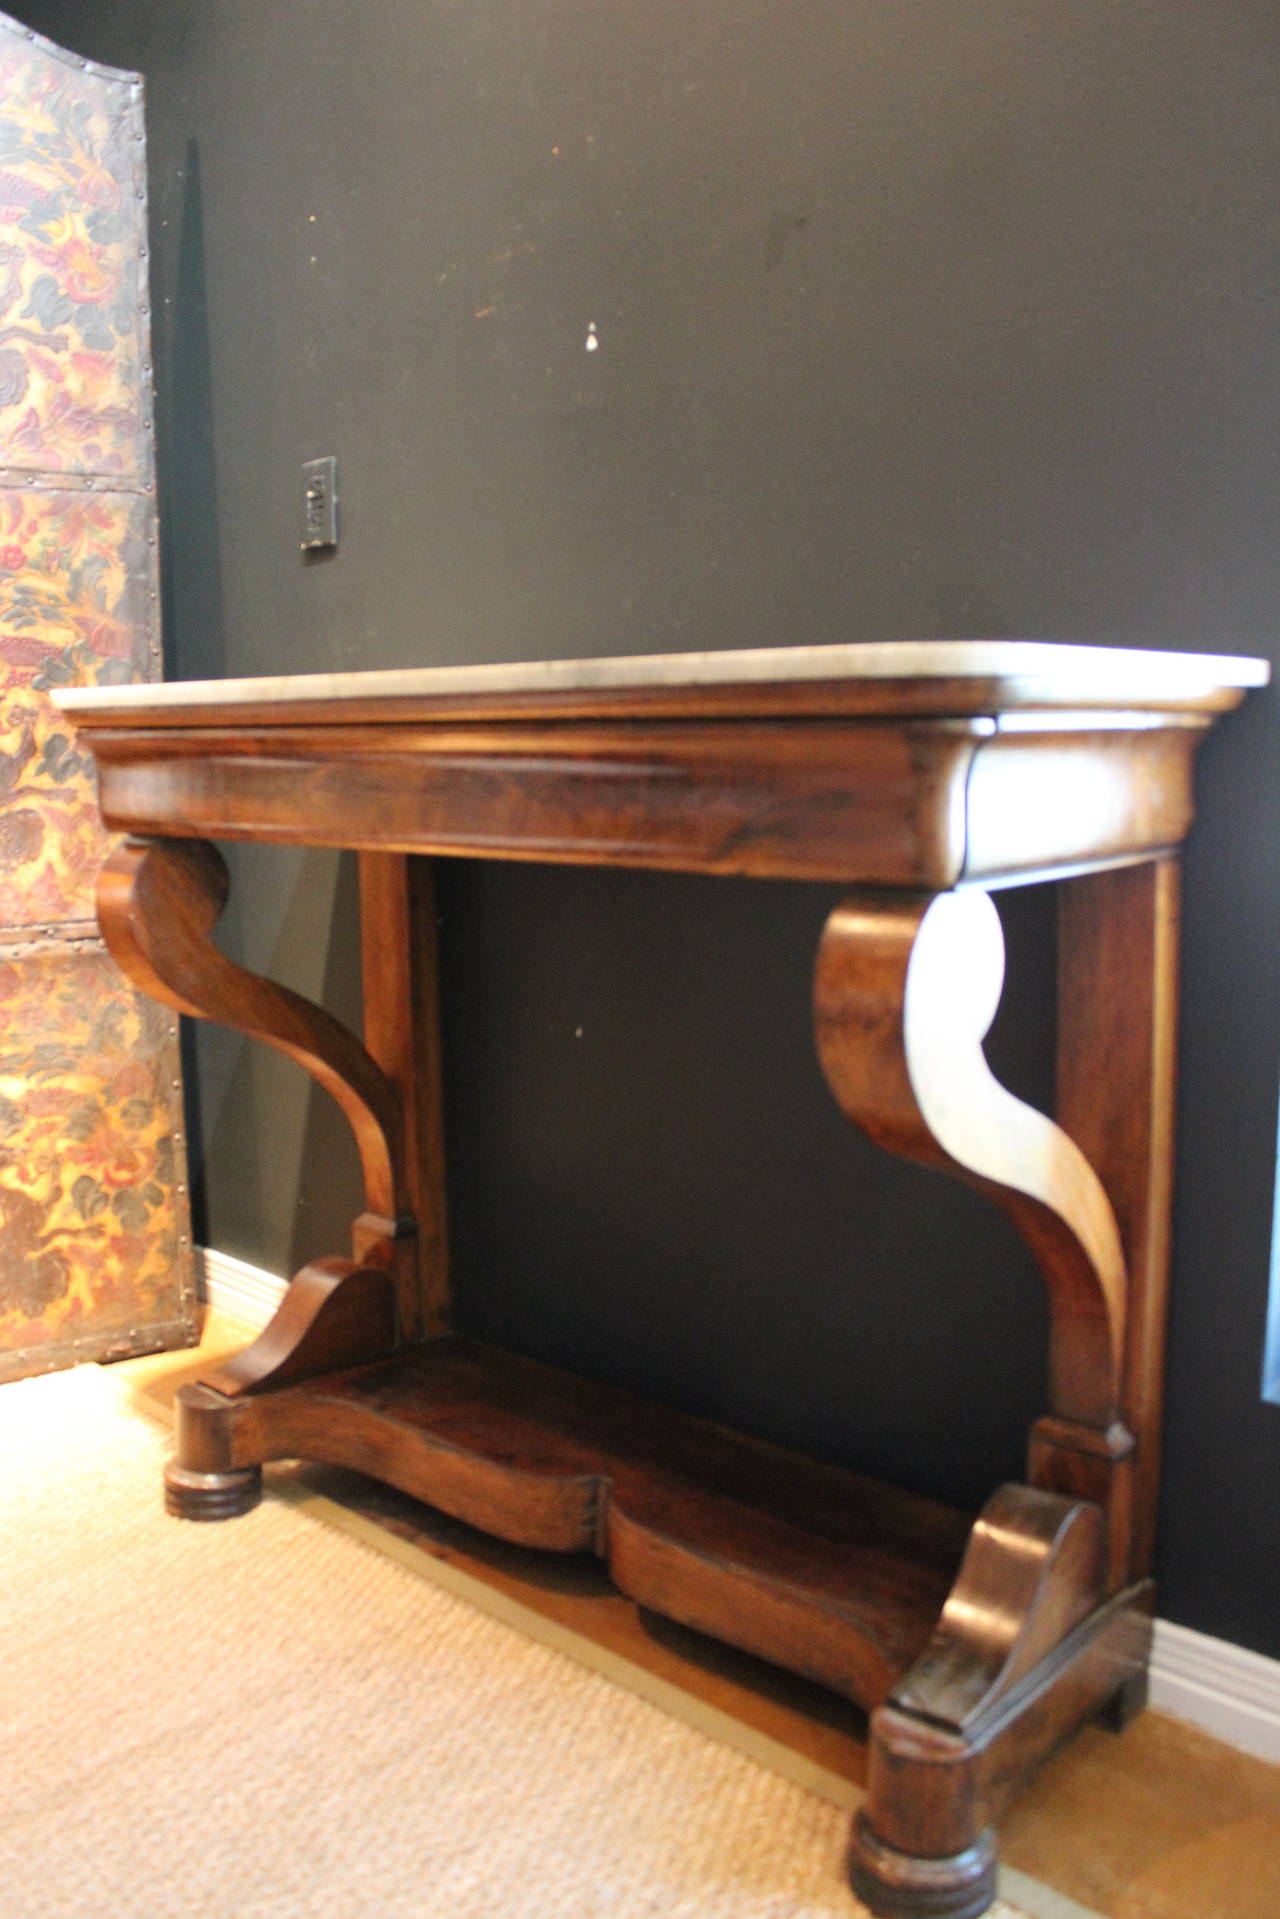 Antique walnut console table with scroll base and hidden drawer set below aged white and grey Carrara marble top.